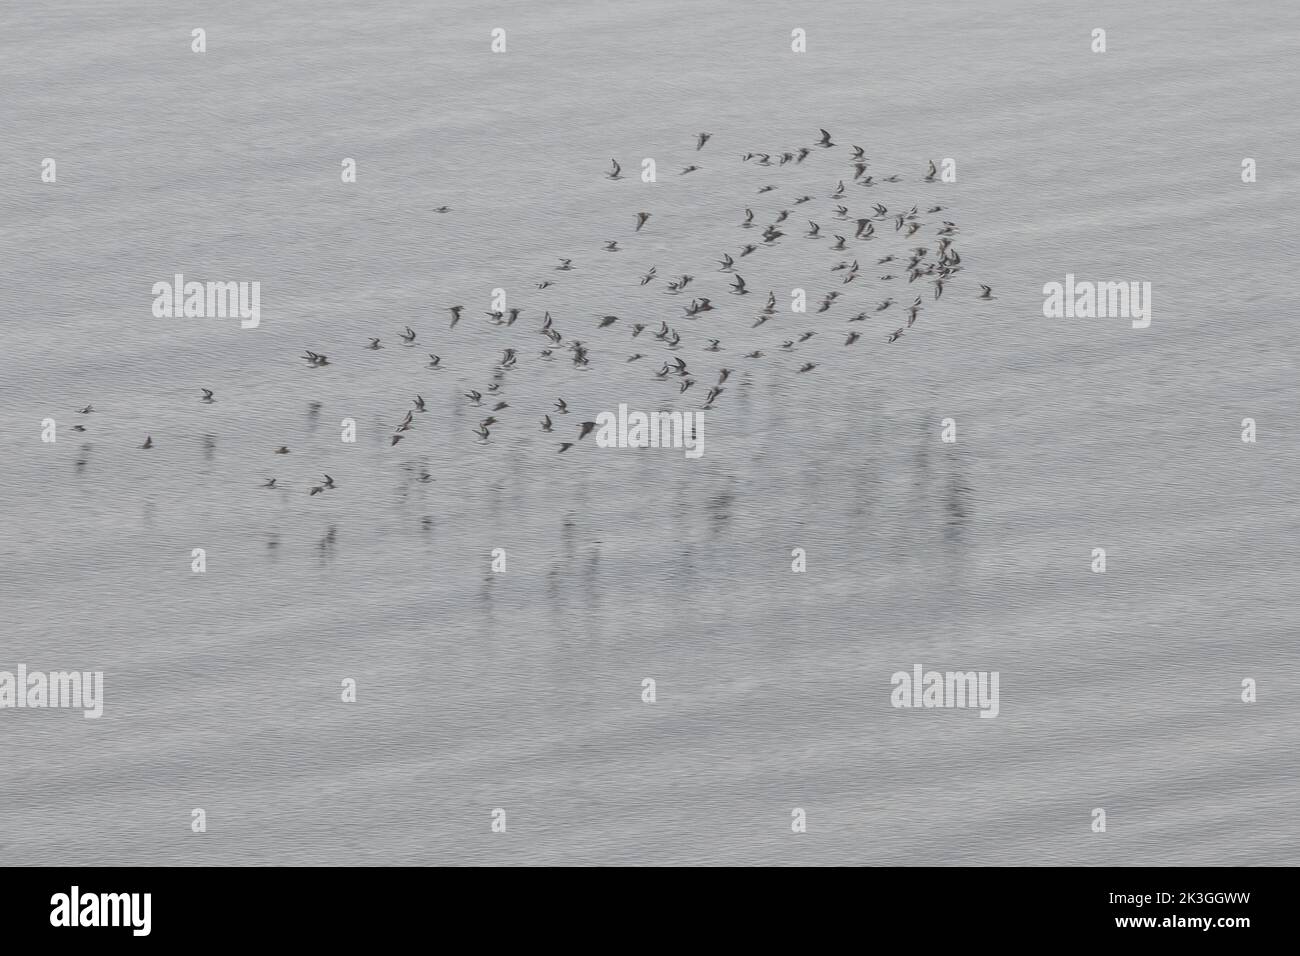 A flock of least sandpiper (Calidris minutilla) flying over the calm water of the Pacific ocean off the coast of California. Stock Photo